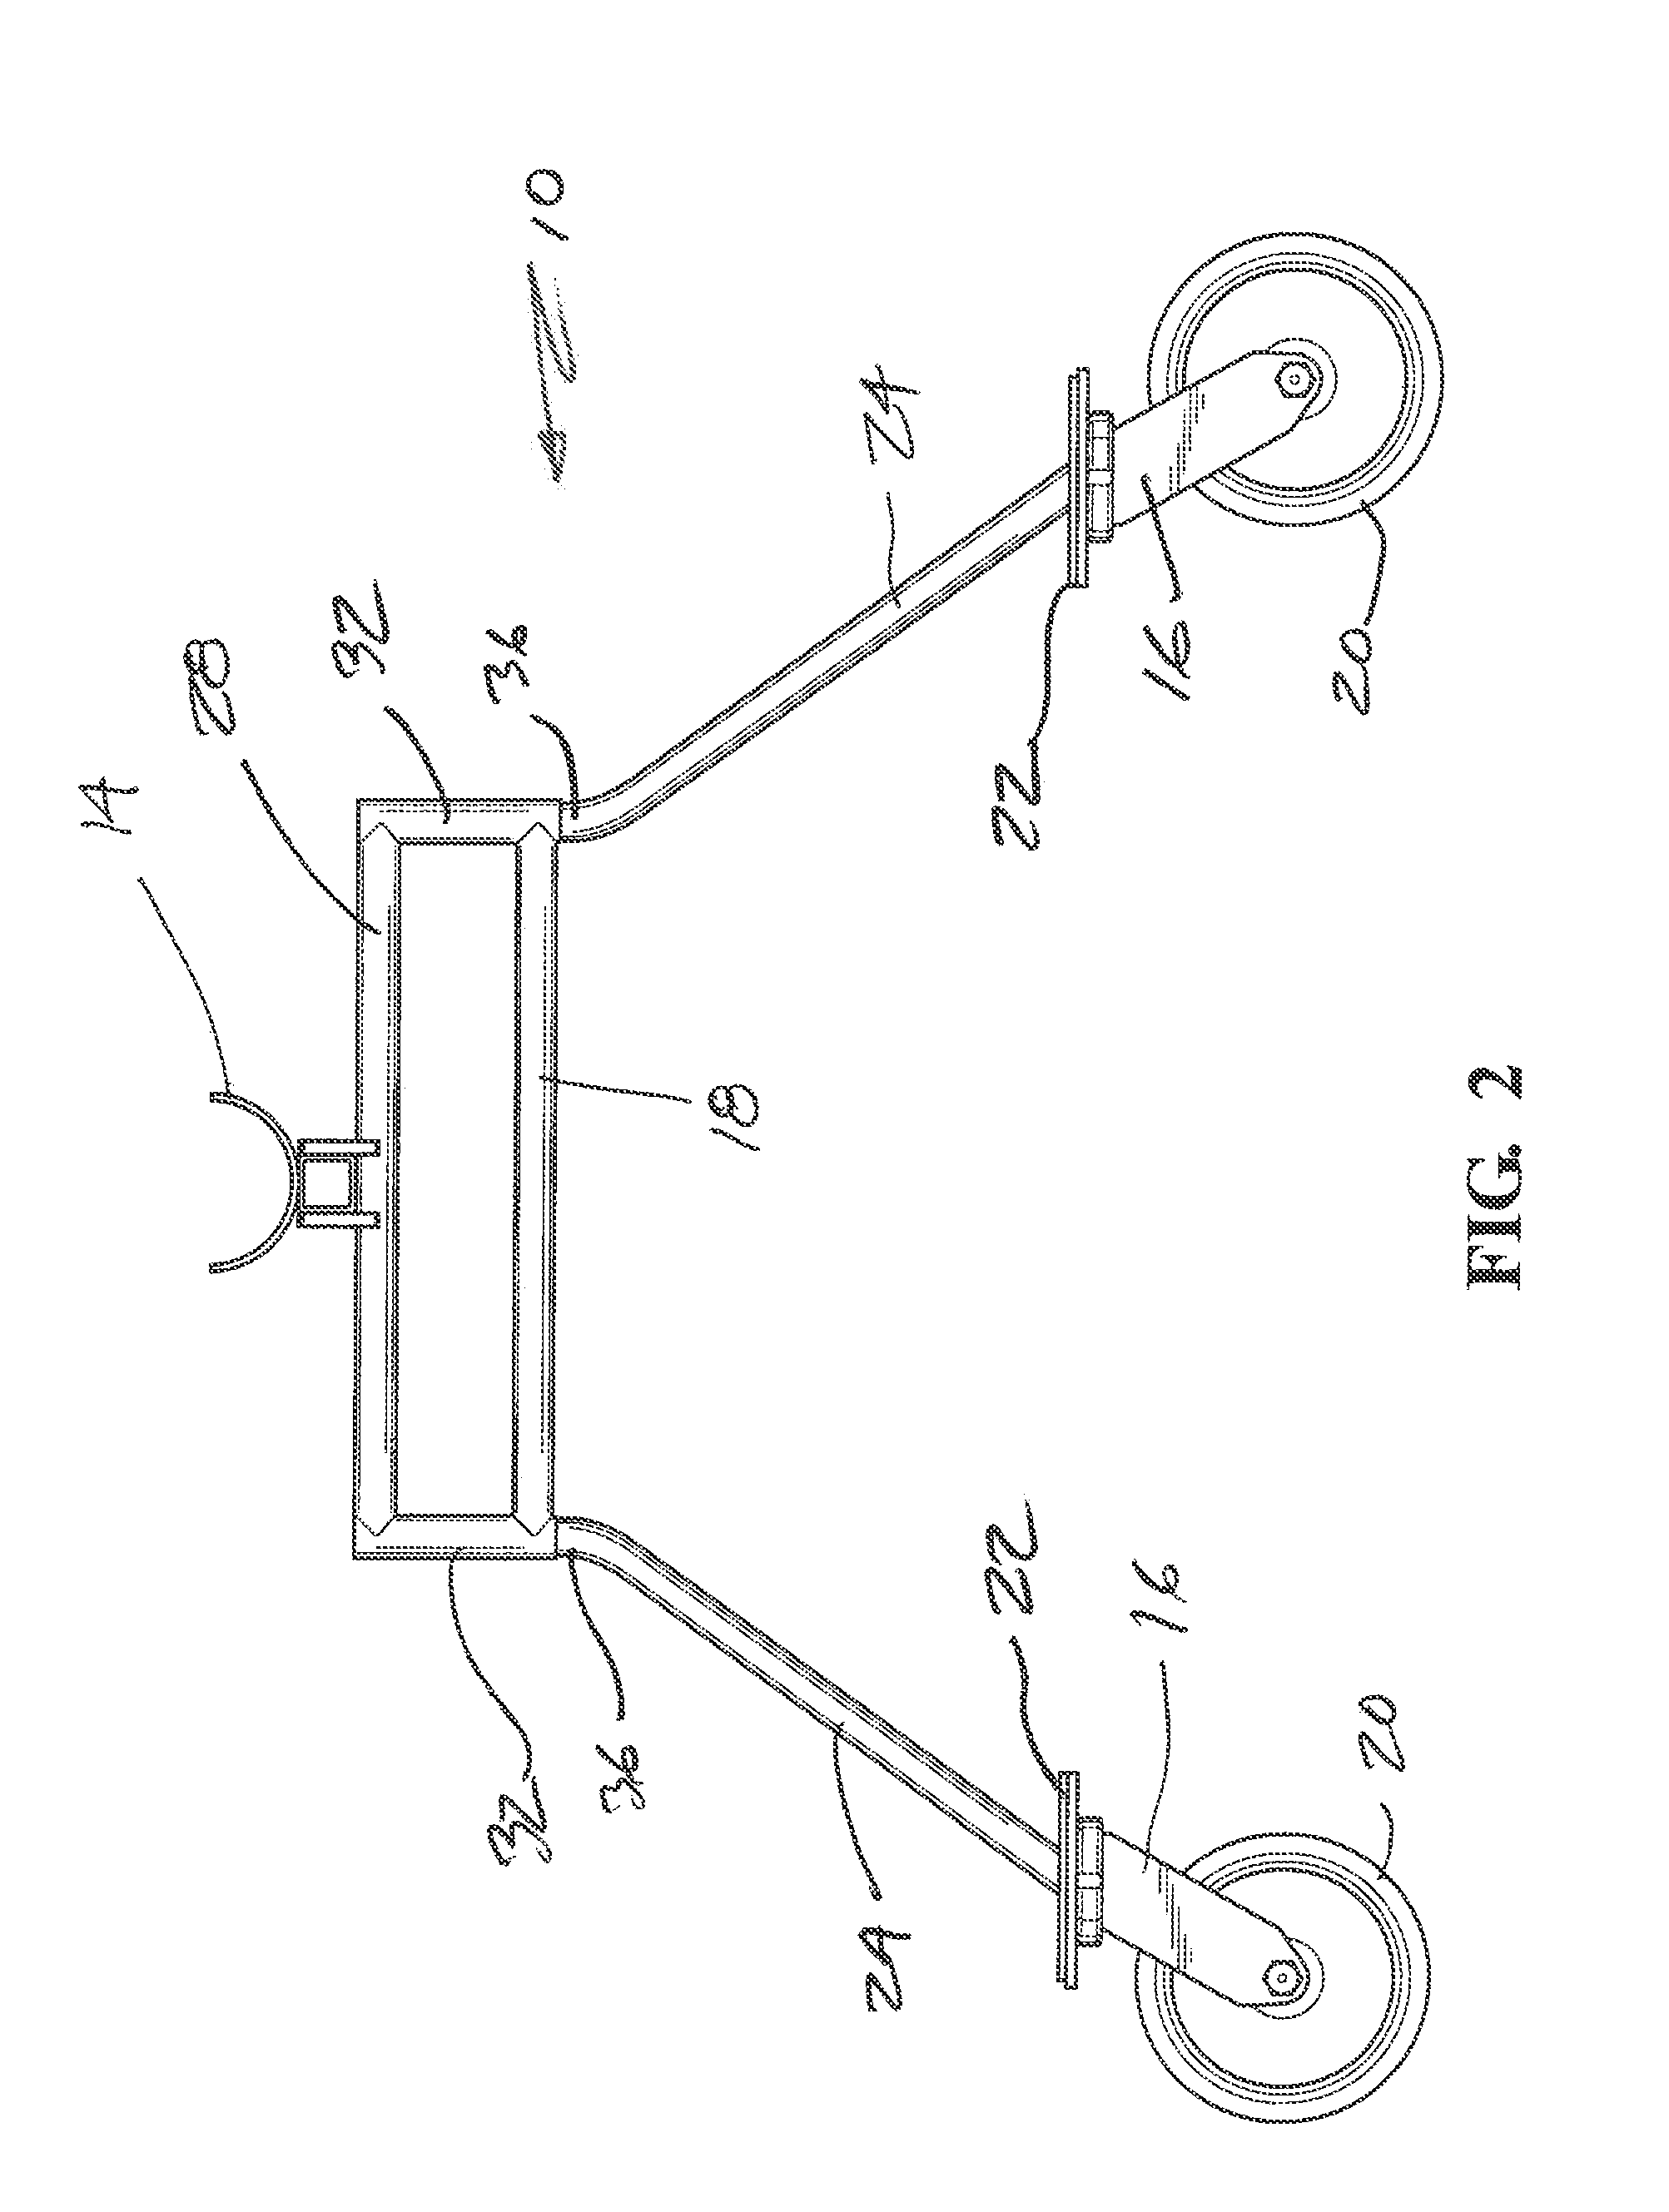 System for manipulating concrete spreading hoses